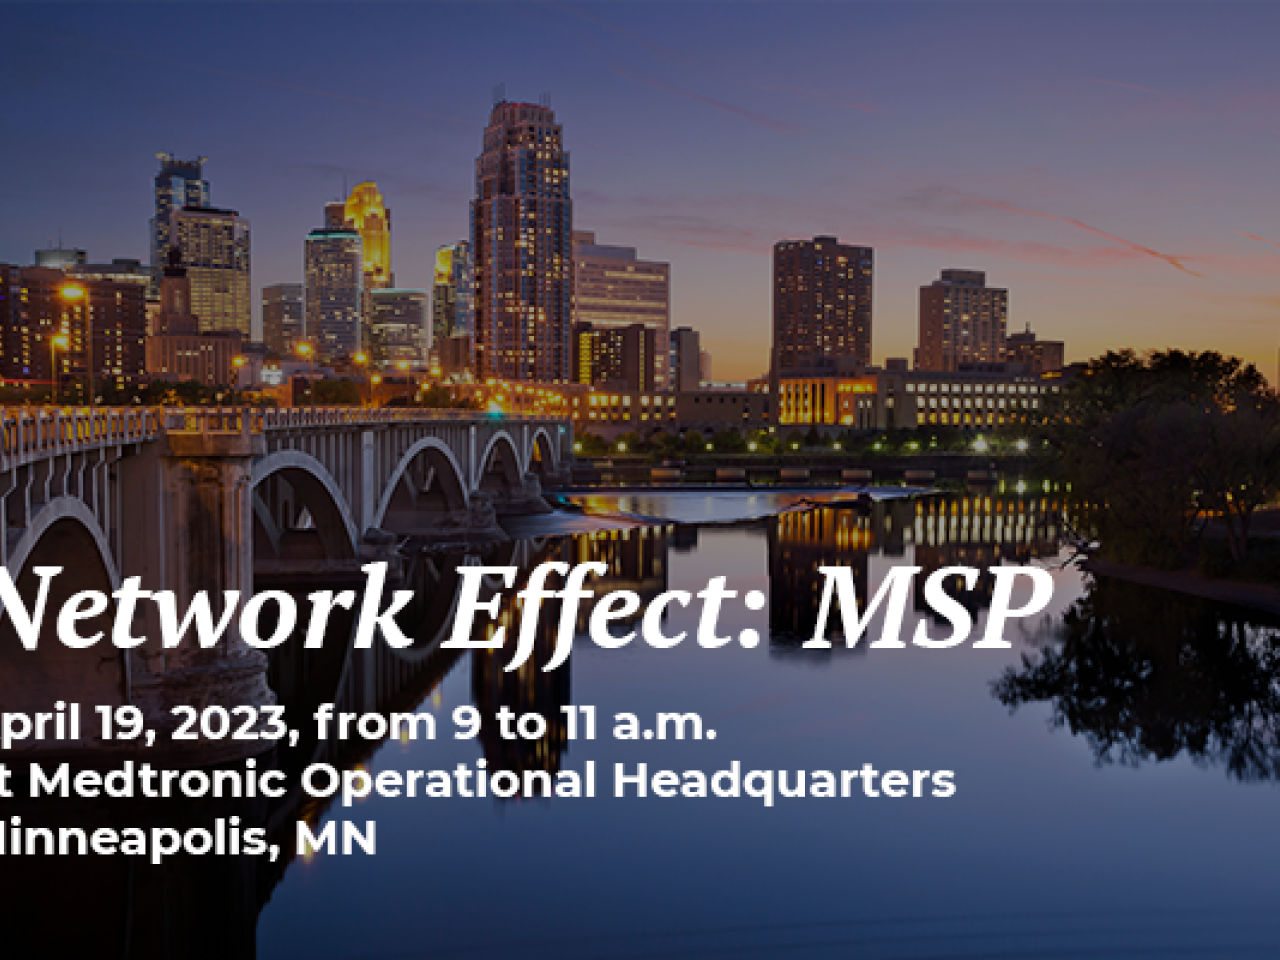 Network Effect: MSP April 19, 2023, from 9 to 11 a.m. at Medtronic Operational Headquarters Minneapolis, MN